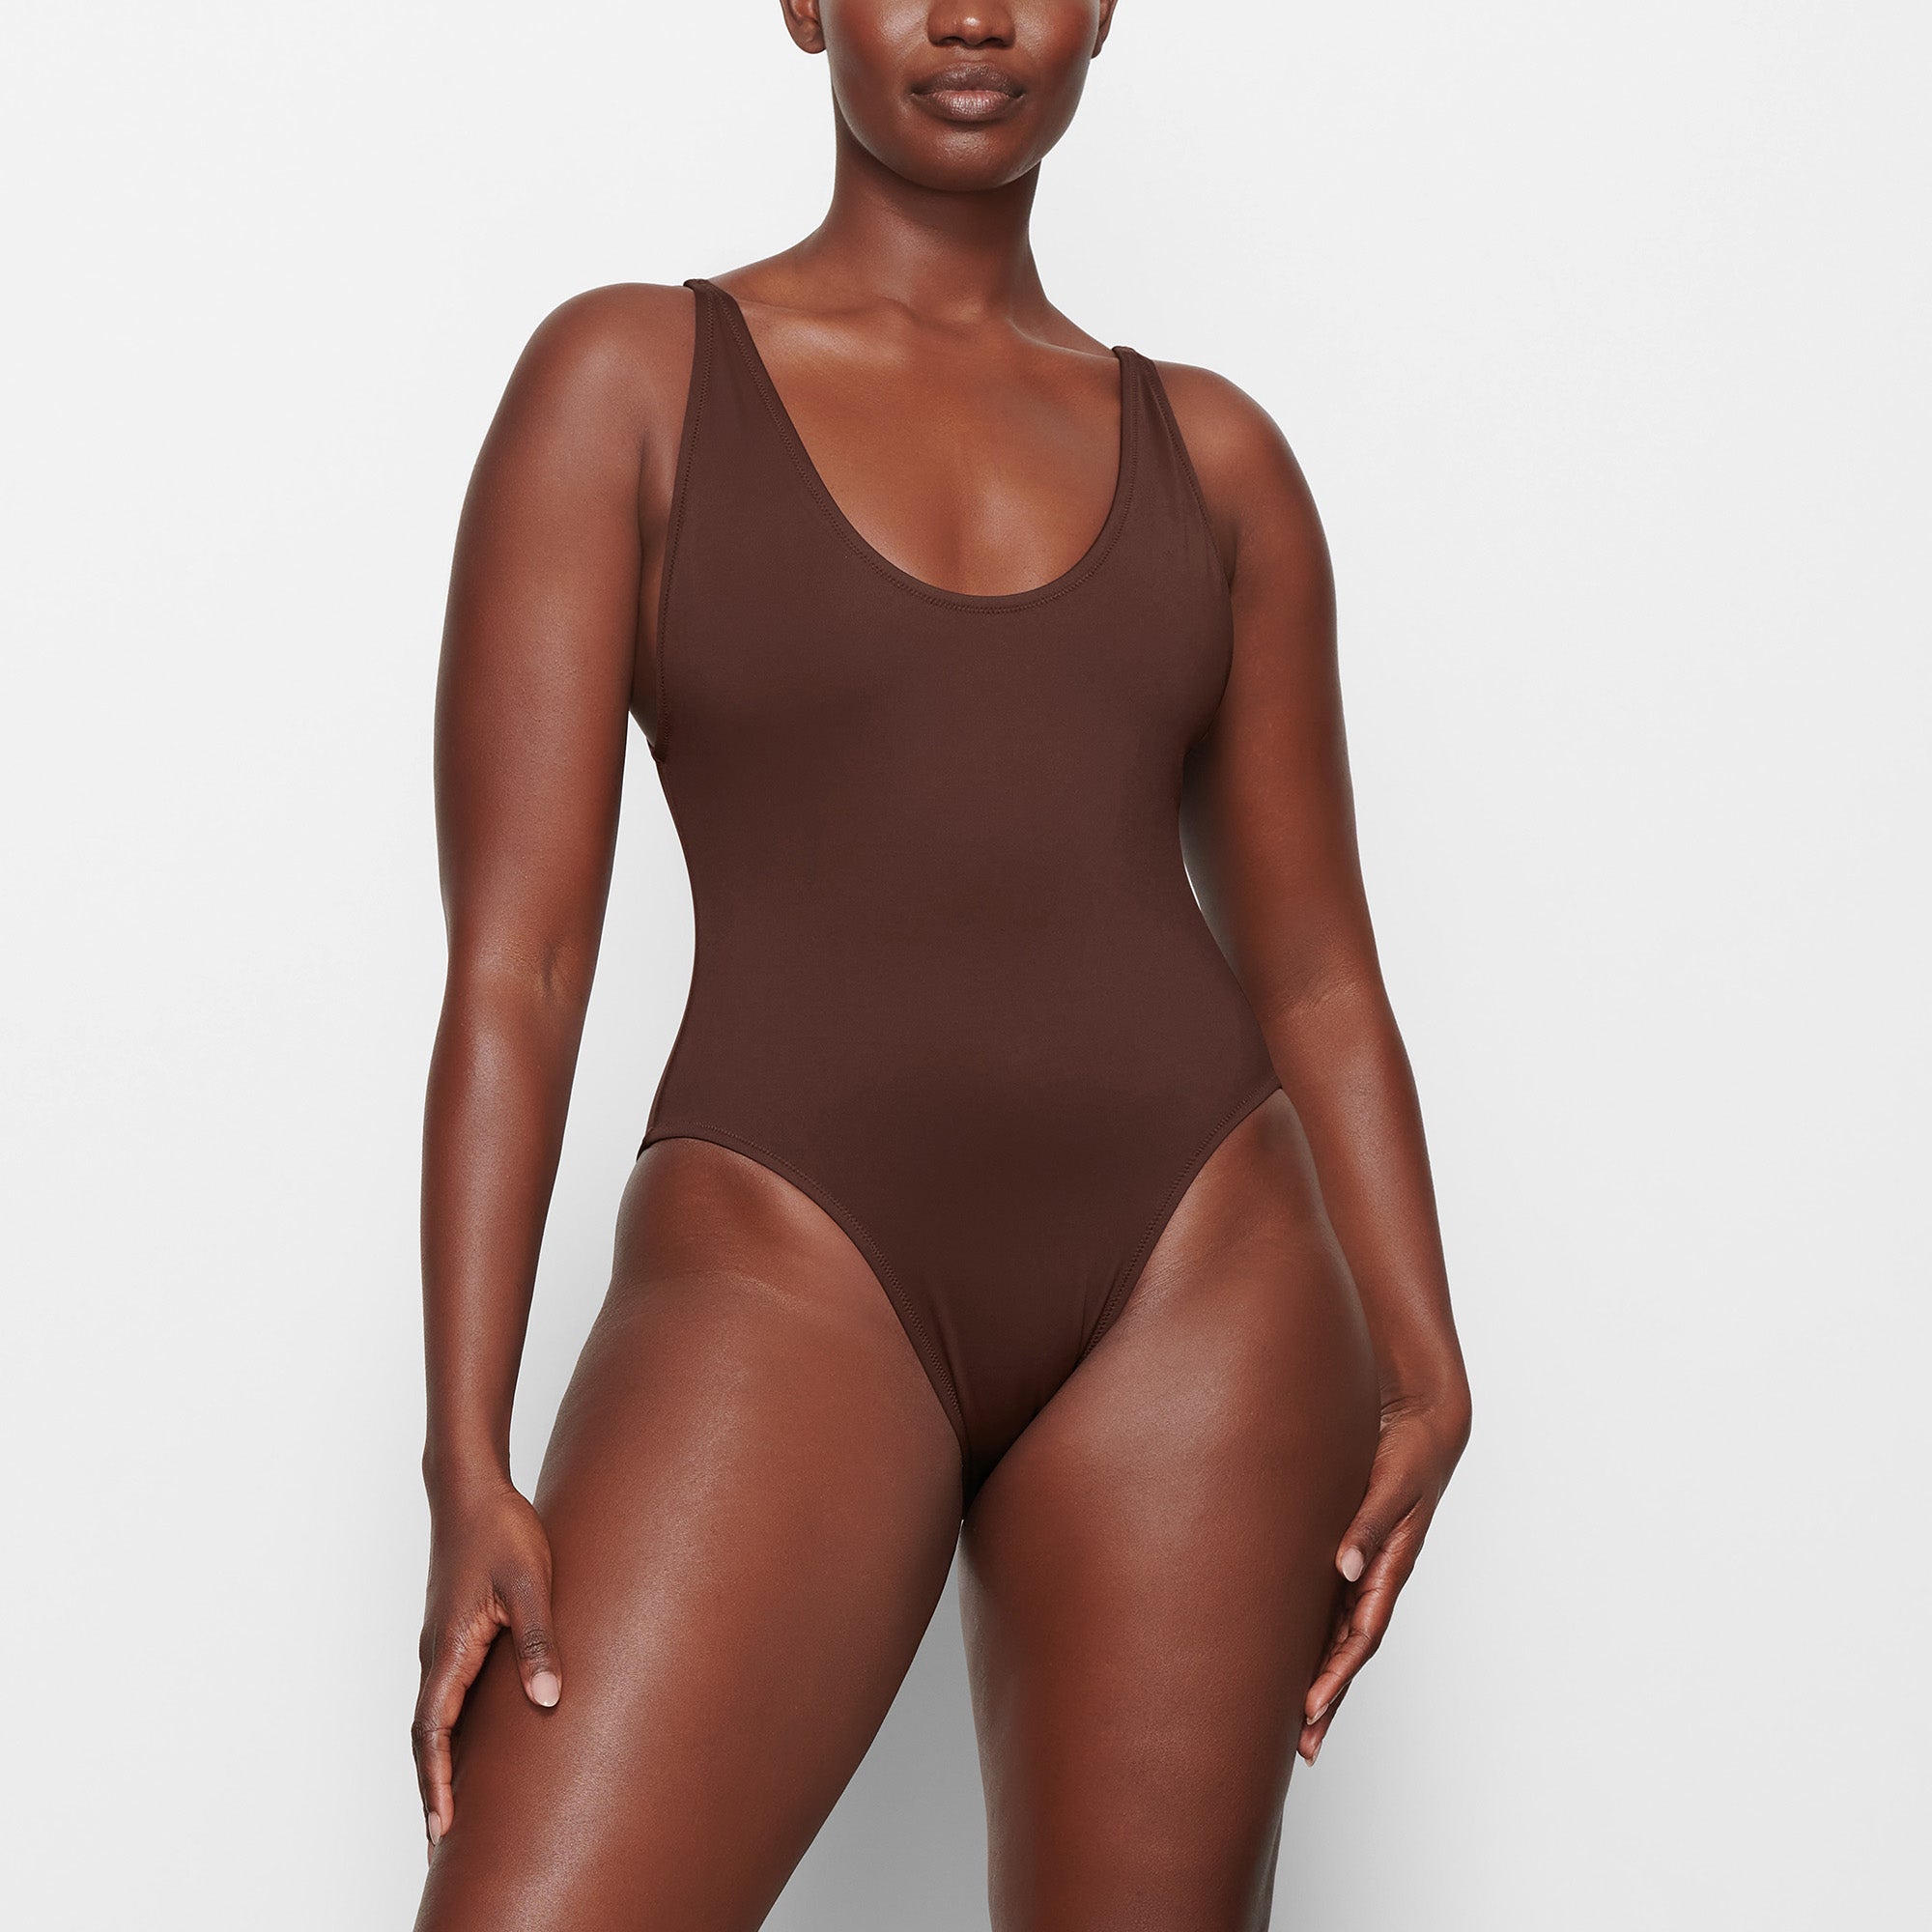 Skims All in One Strapless One Piece Jumpsuit in Cocoa S